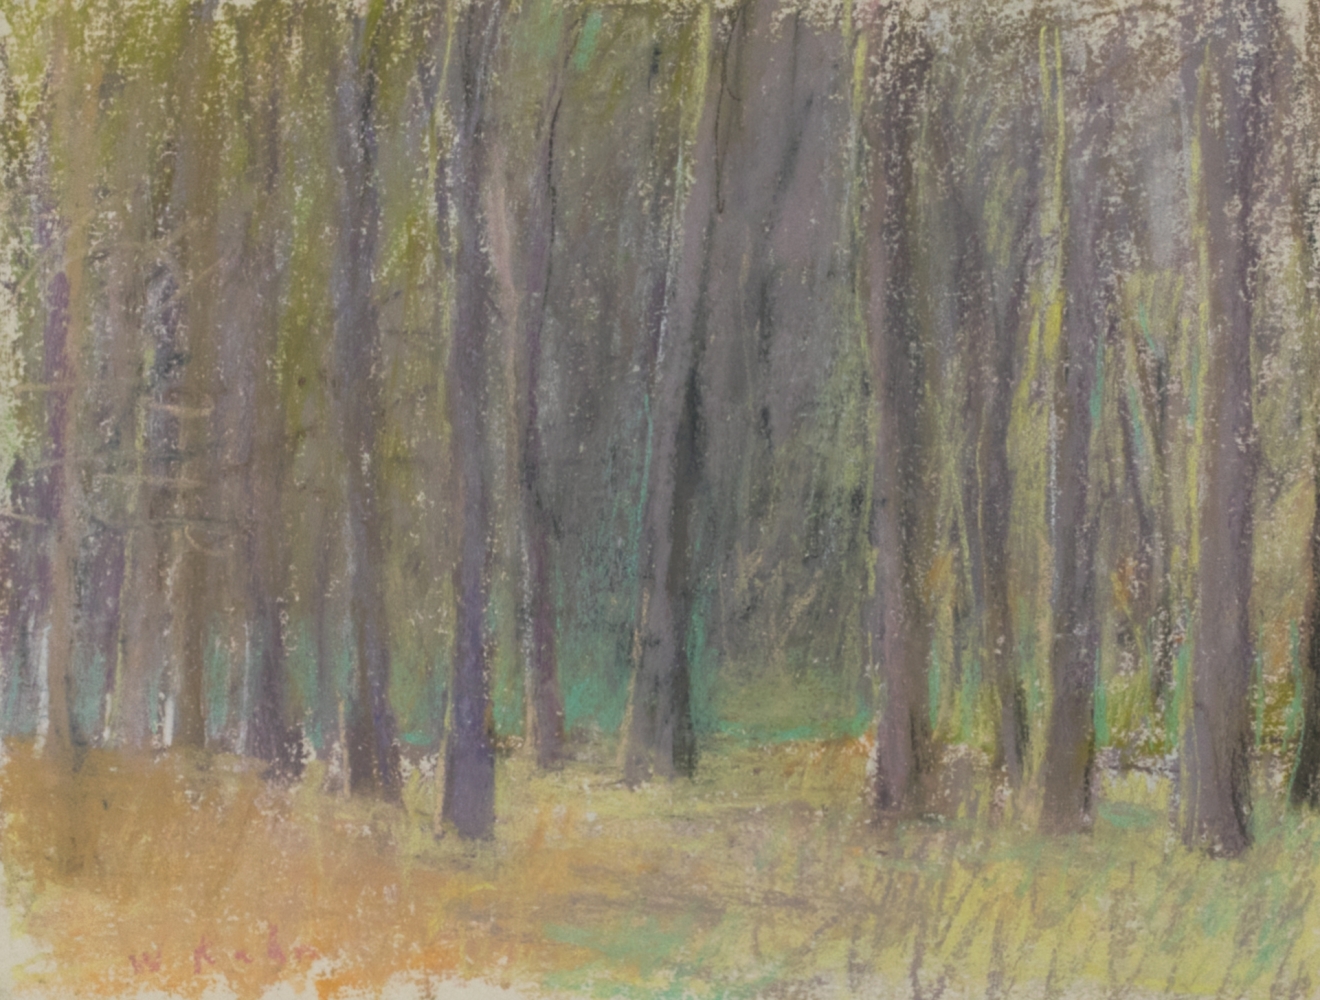 Wolf Kahn, Oaks, Pastel on paper, 1988, 9 x 12 inches, Wolf Kahn Pastels, Wolf Kahn oil pastel, Wolf Kahn Pastels for sale, Wolf Kahn art for sale, Wolf Kahn original art for sale, Wolf Kahn Artwork, Wolf Kahn Landscape paintings, Wolf Kahn trees